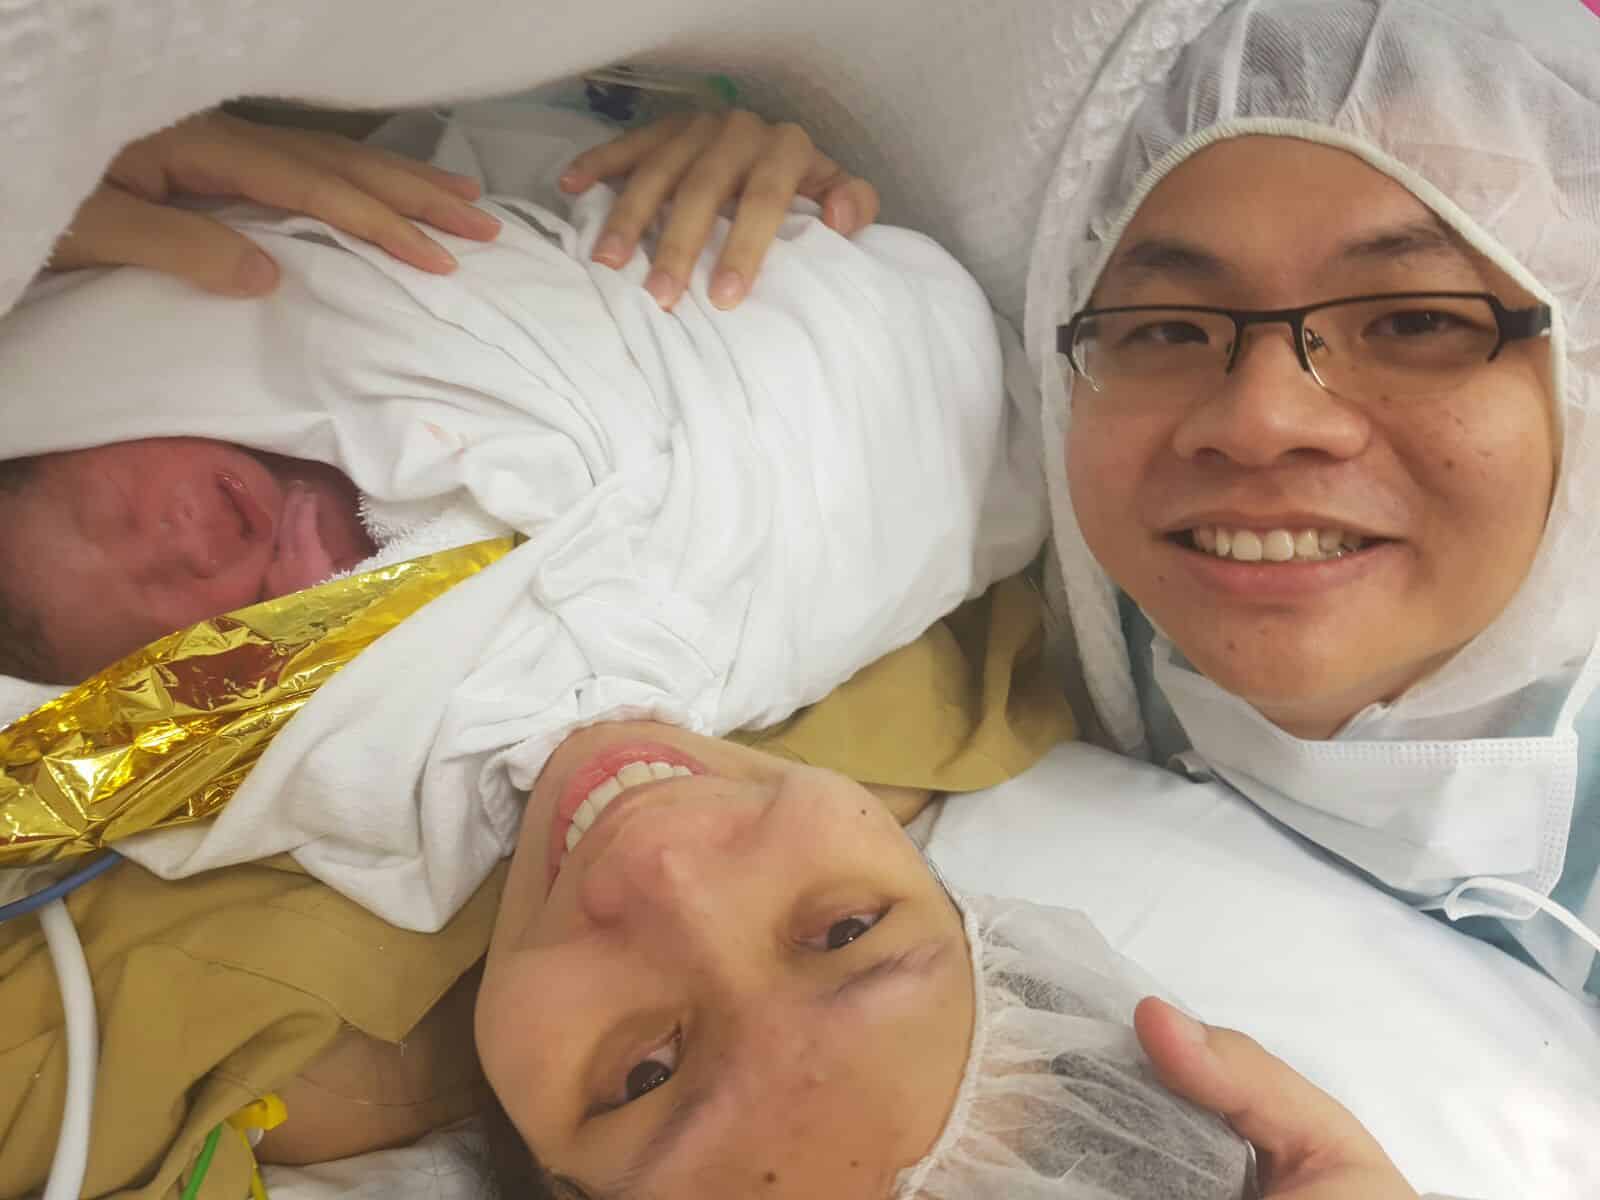 She had aggressive cancer while pregnant. Yet, against the odds, this happened.